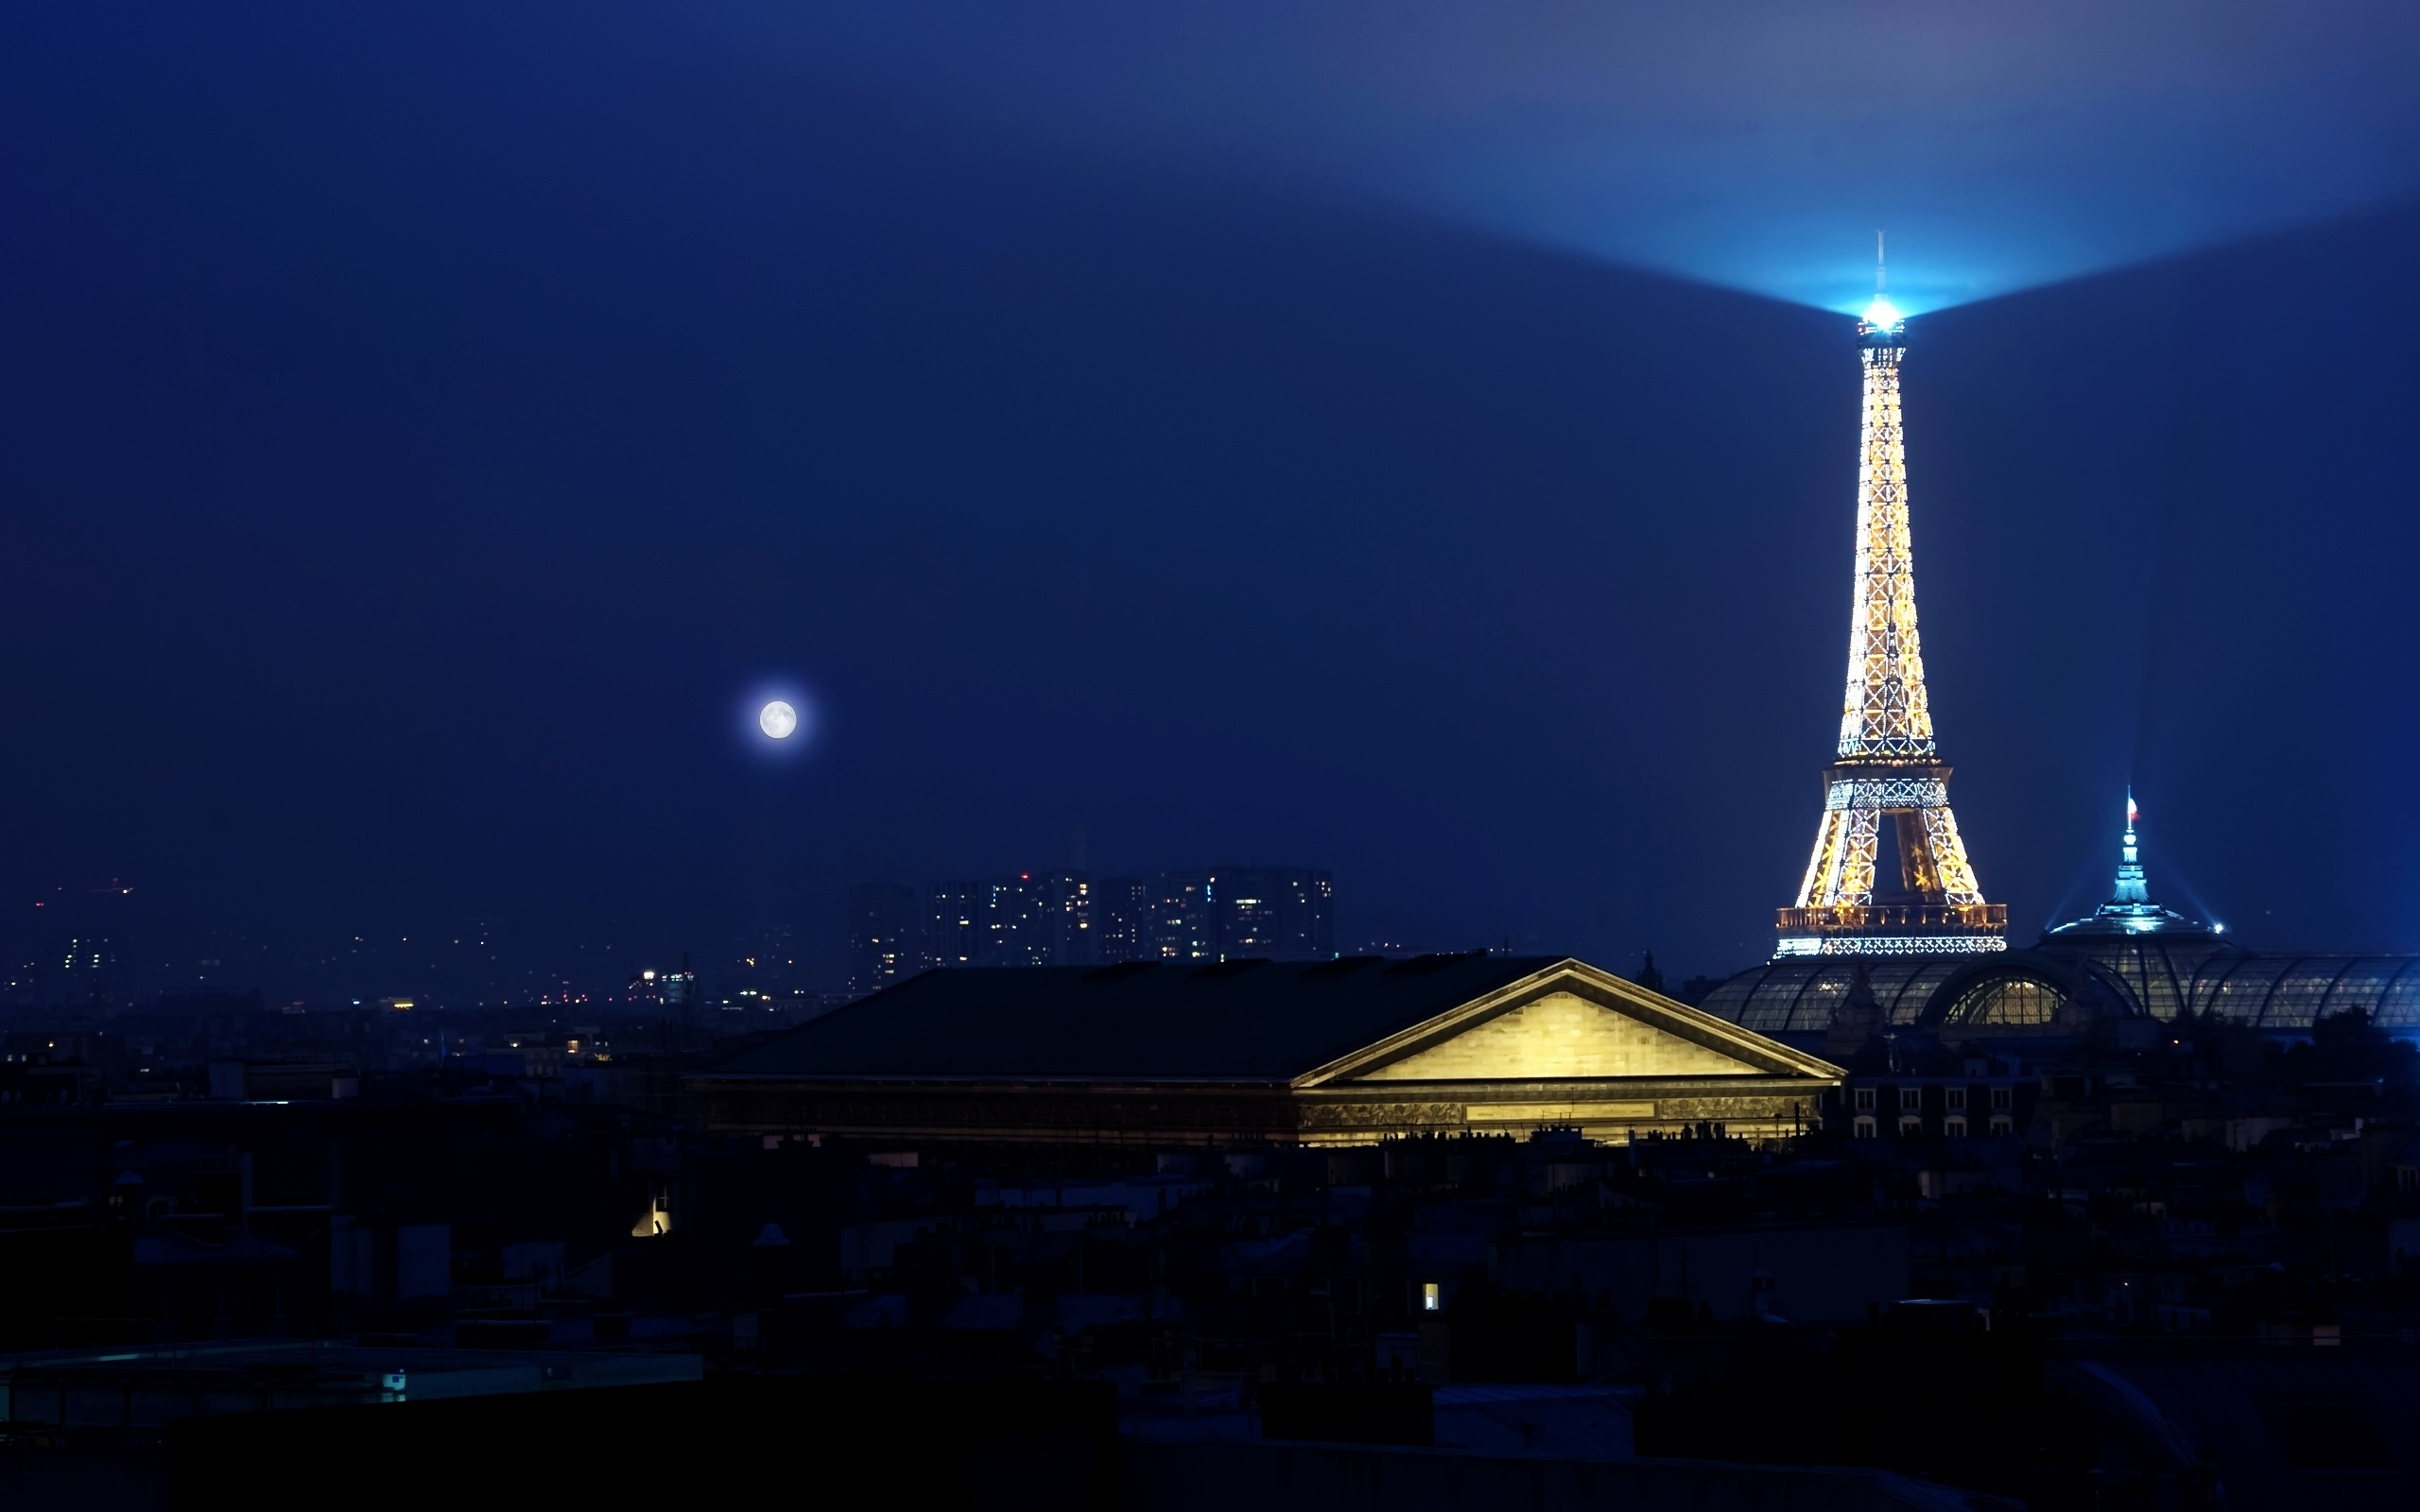 man made, eiffel tower, city, france, monument, paris, scenic, monuments